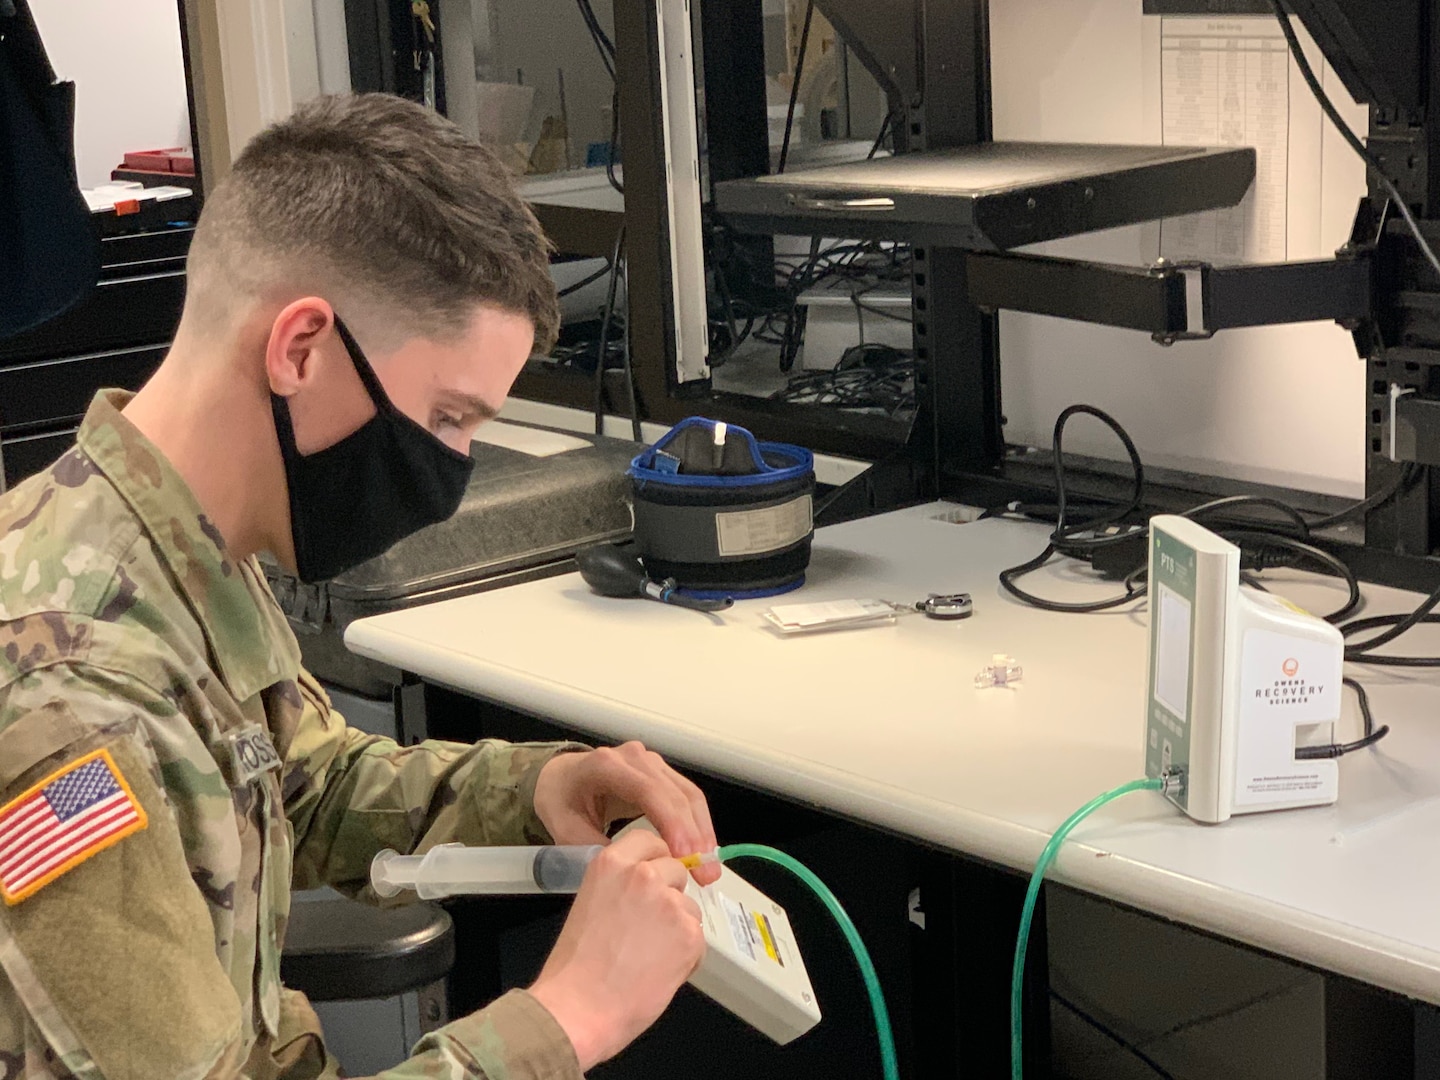 Pfc. Patrick Cross, biomedical electronics technician for Medical Department Activity – Alaska fixes a leak in a pneumatic tourniquet from the physical therapy department. Cross is part of a team that works to ensure medical equipment functions properly for safe patient care